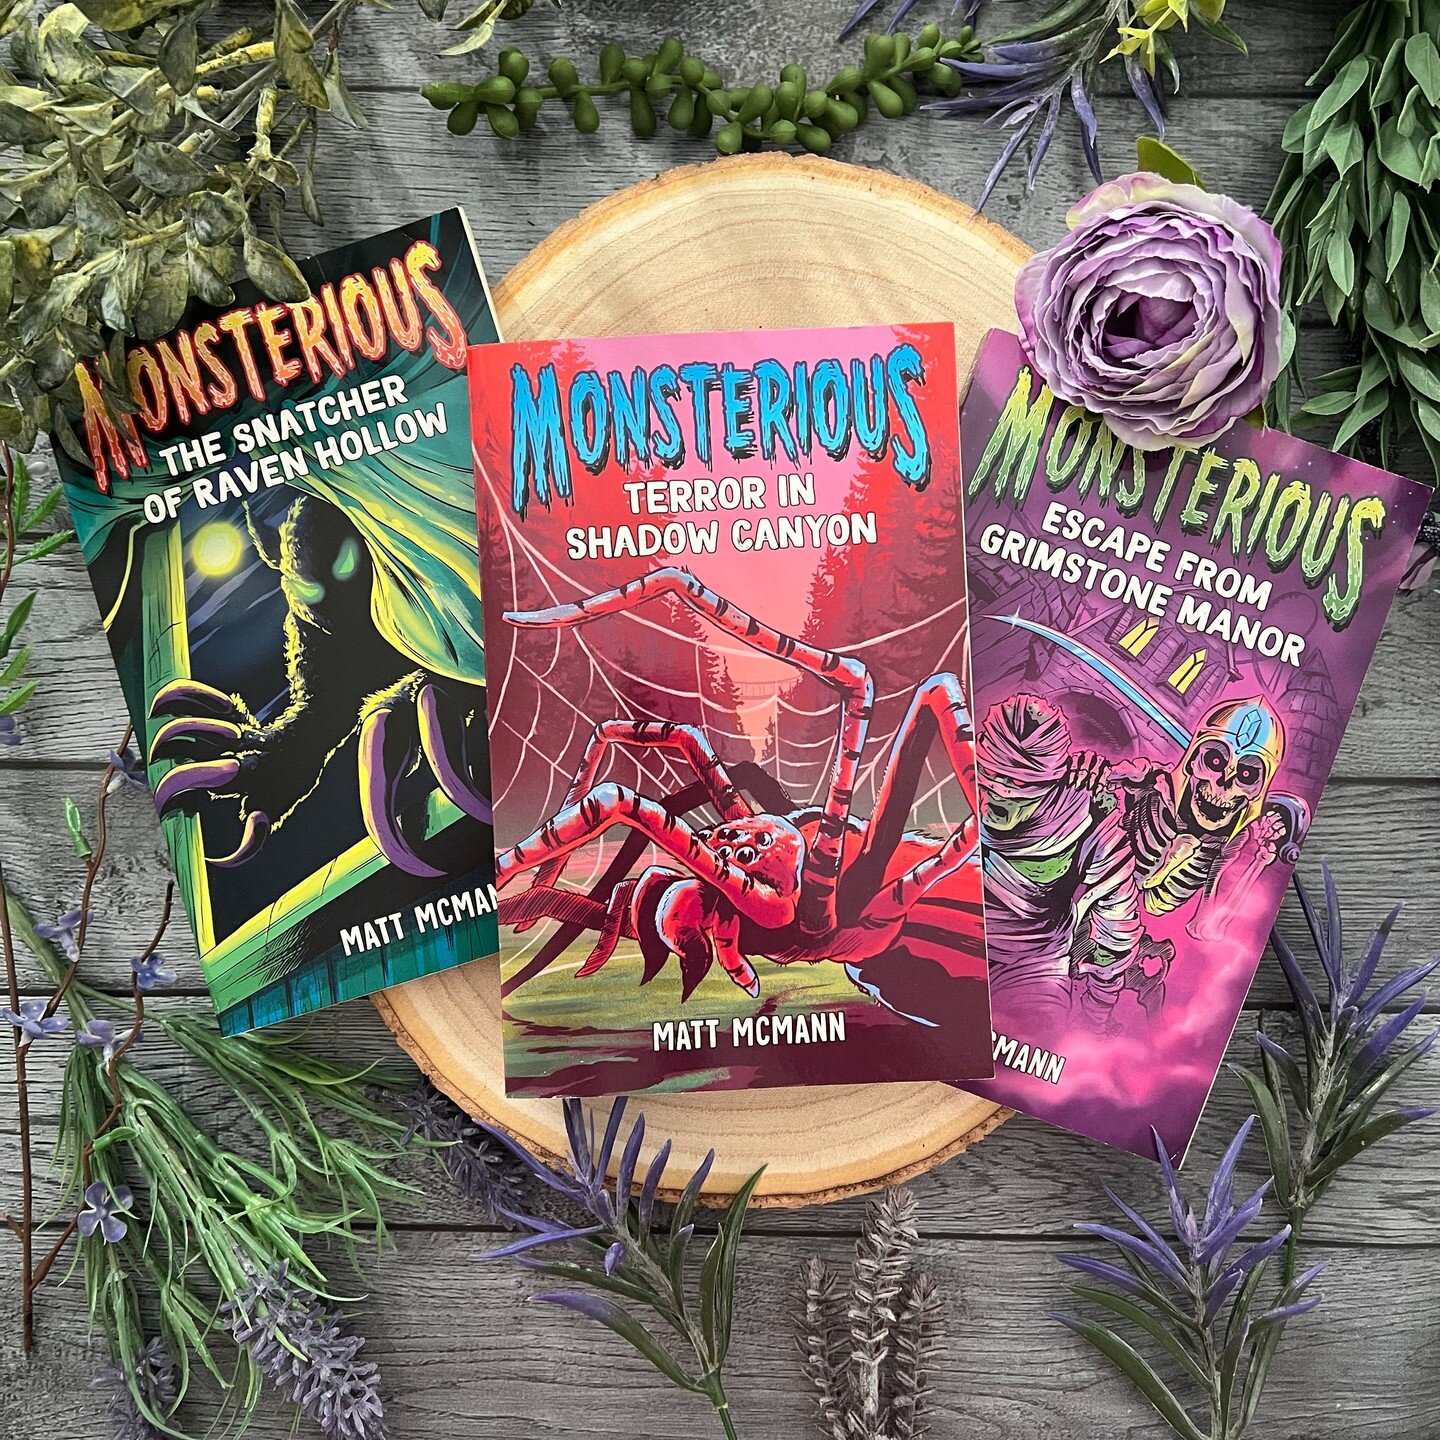 If you&rsquo;re looking for a fun and spooky MG series, definitely check this one out! They&rsquo;re short and sweet and perfect for fall! #monsterious #mgbooks #tbr